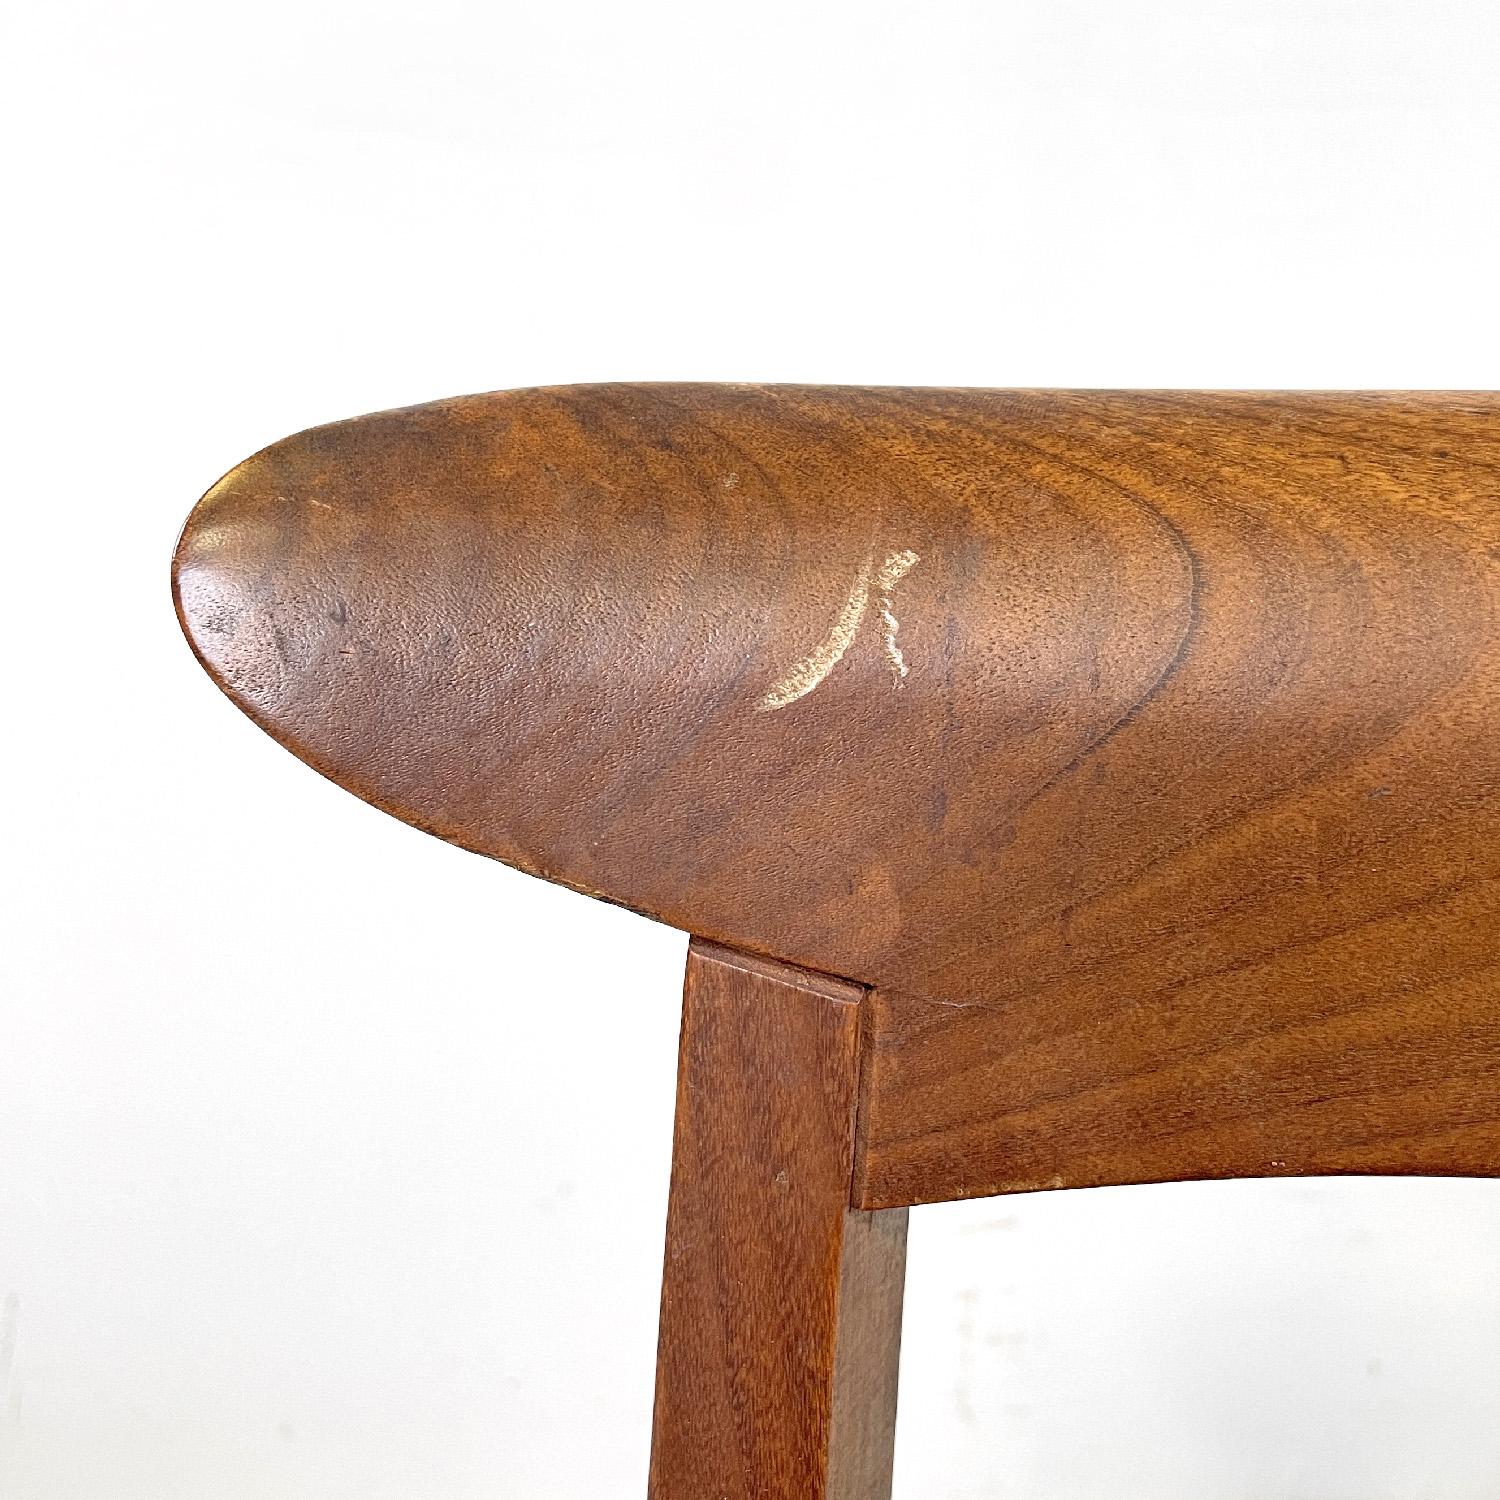 Danish mid-century modern wooden and brown leather chairs, 1950s For Sale 3